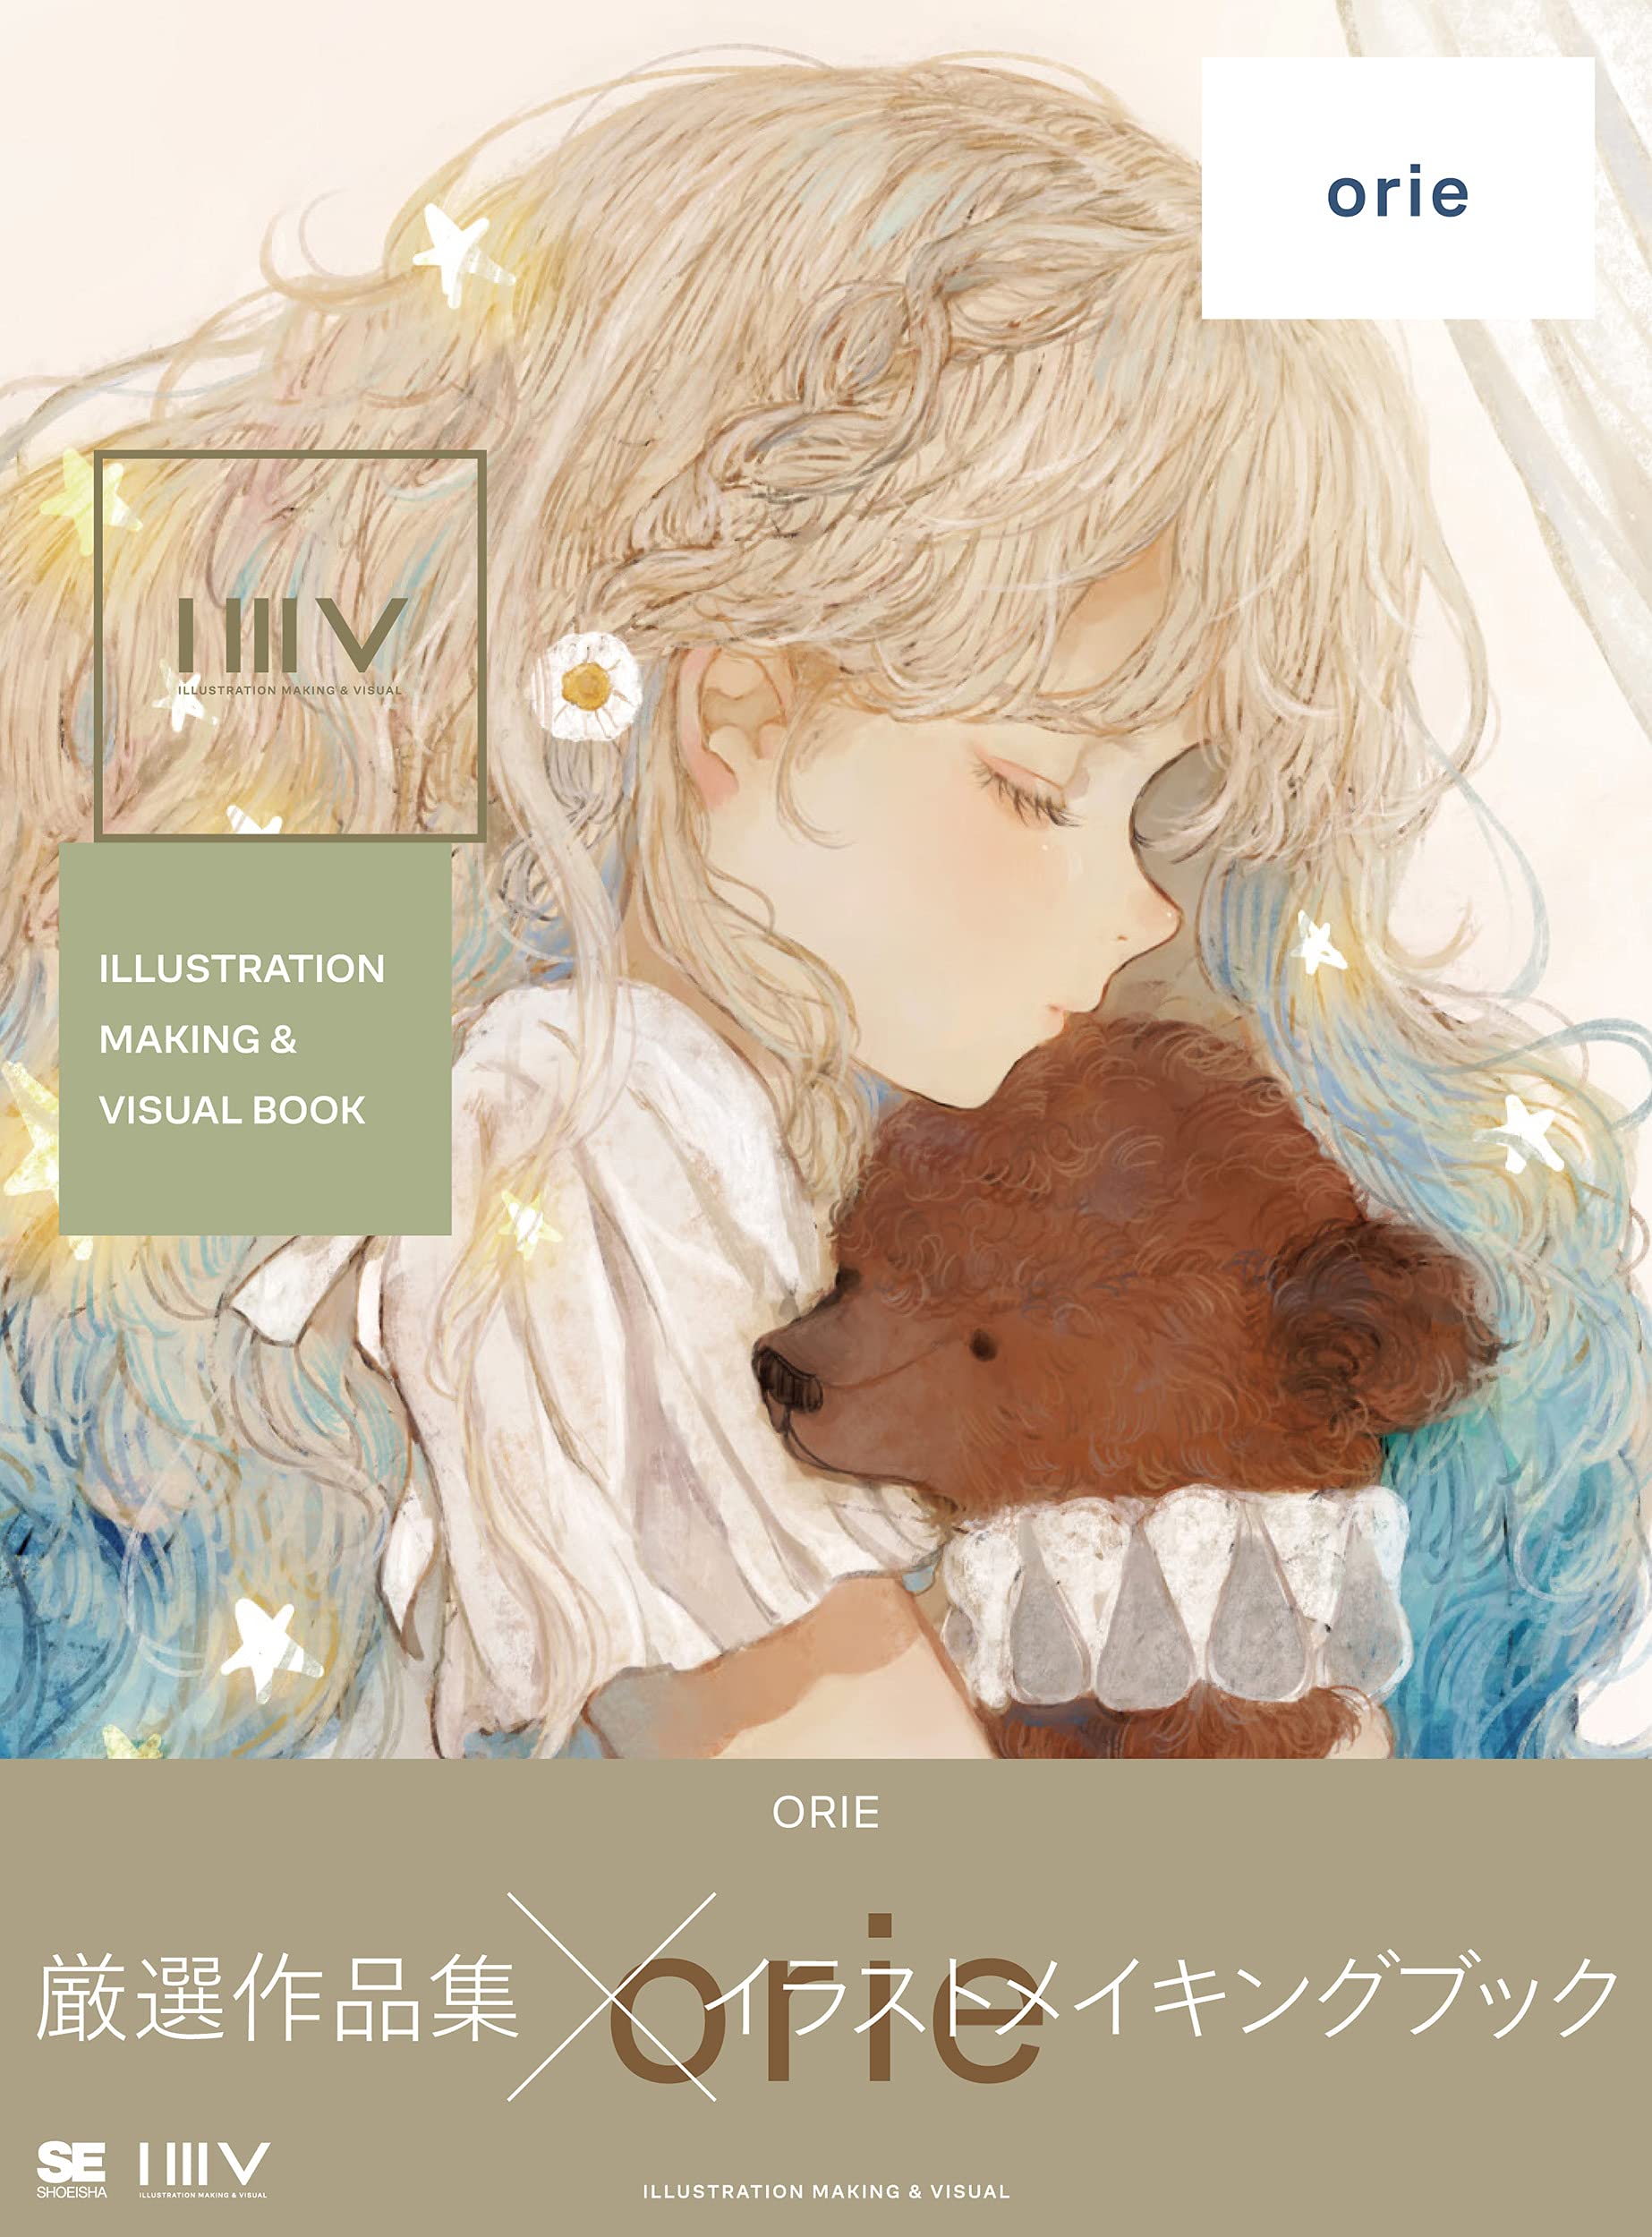 ILLUSTRATION MAKING & VISUAL BOOK orie